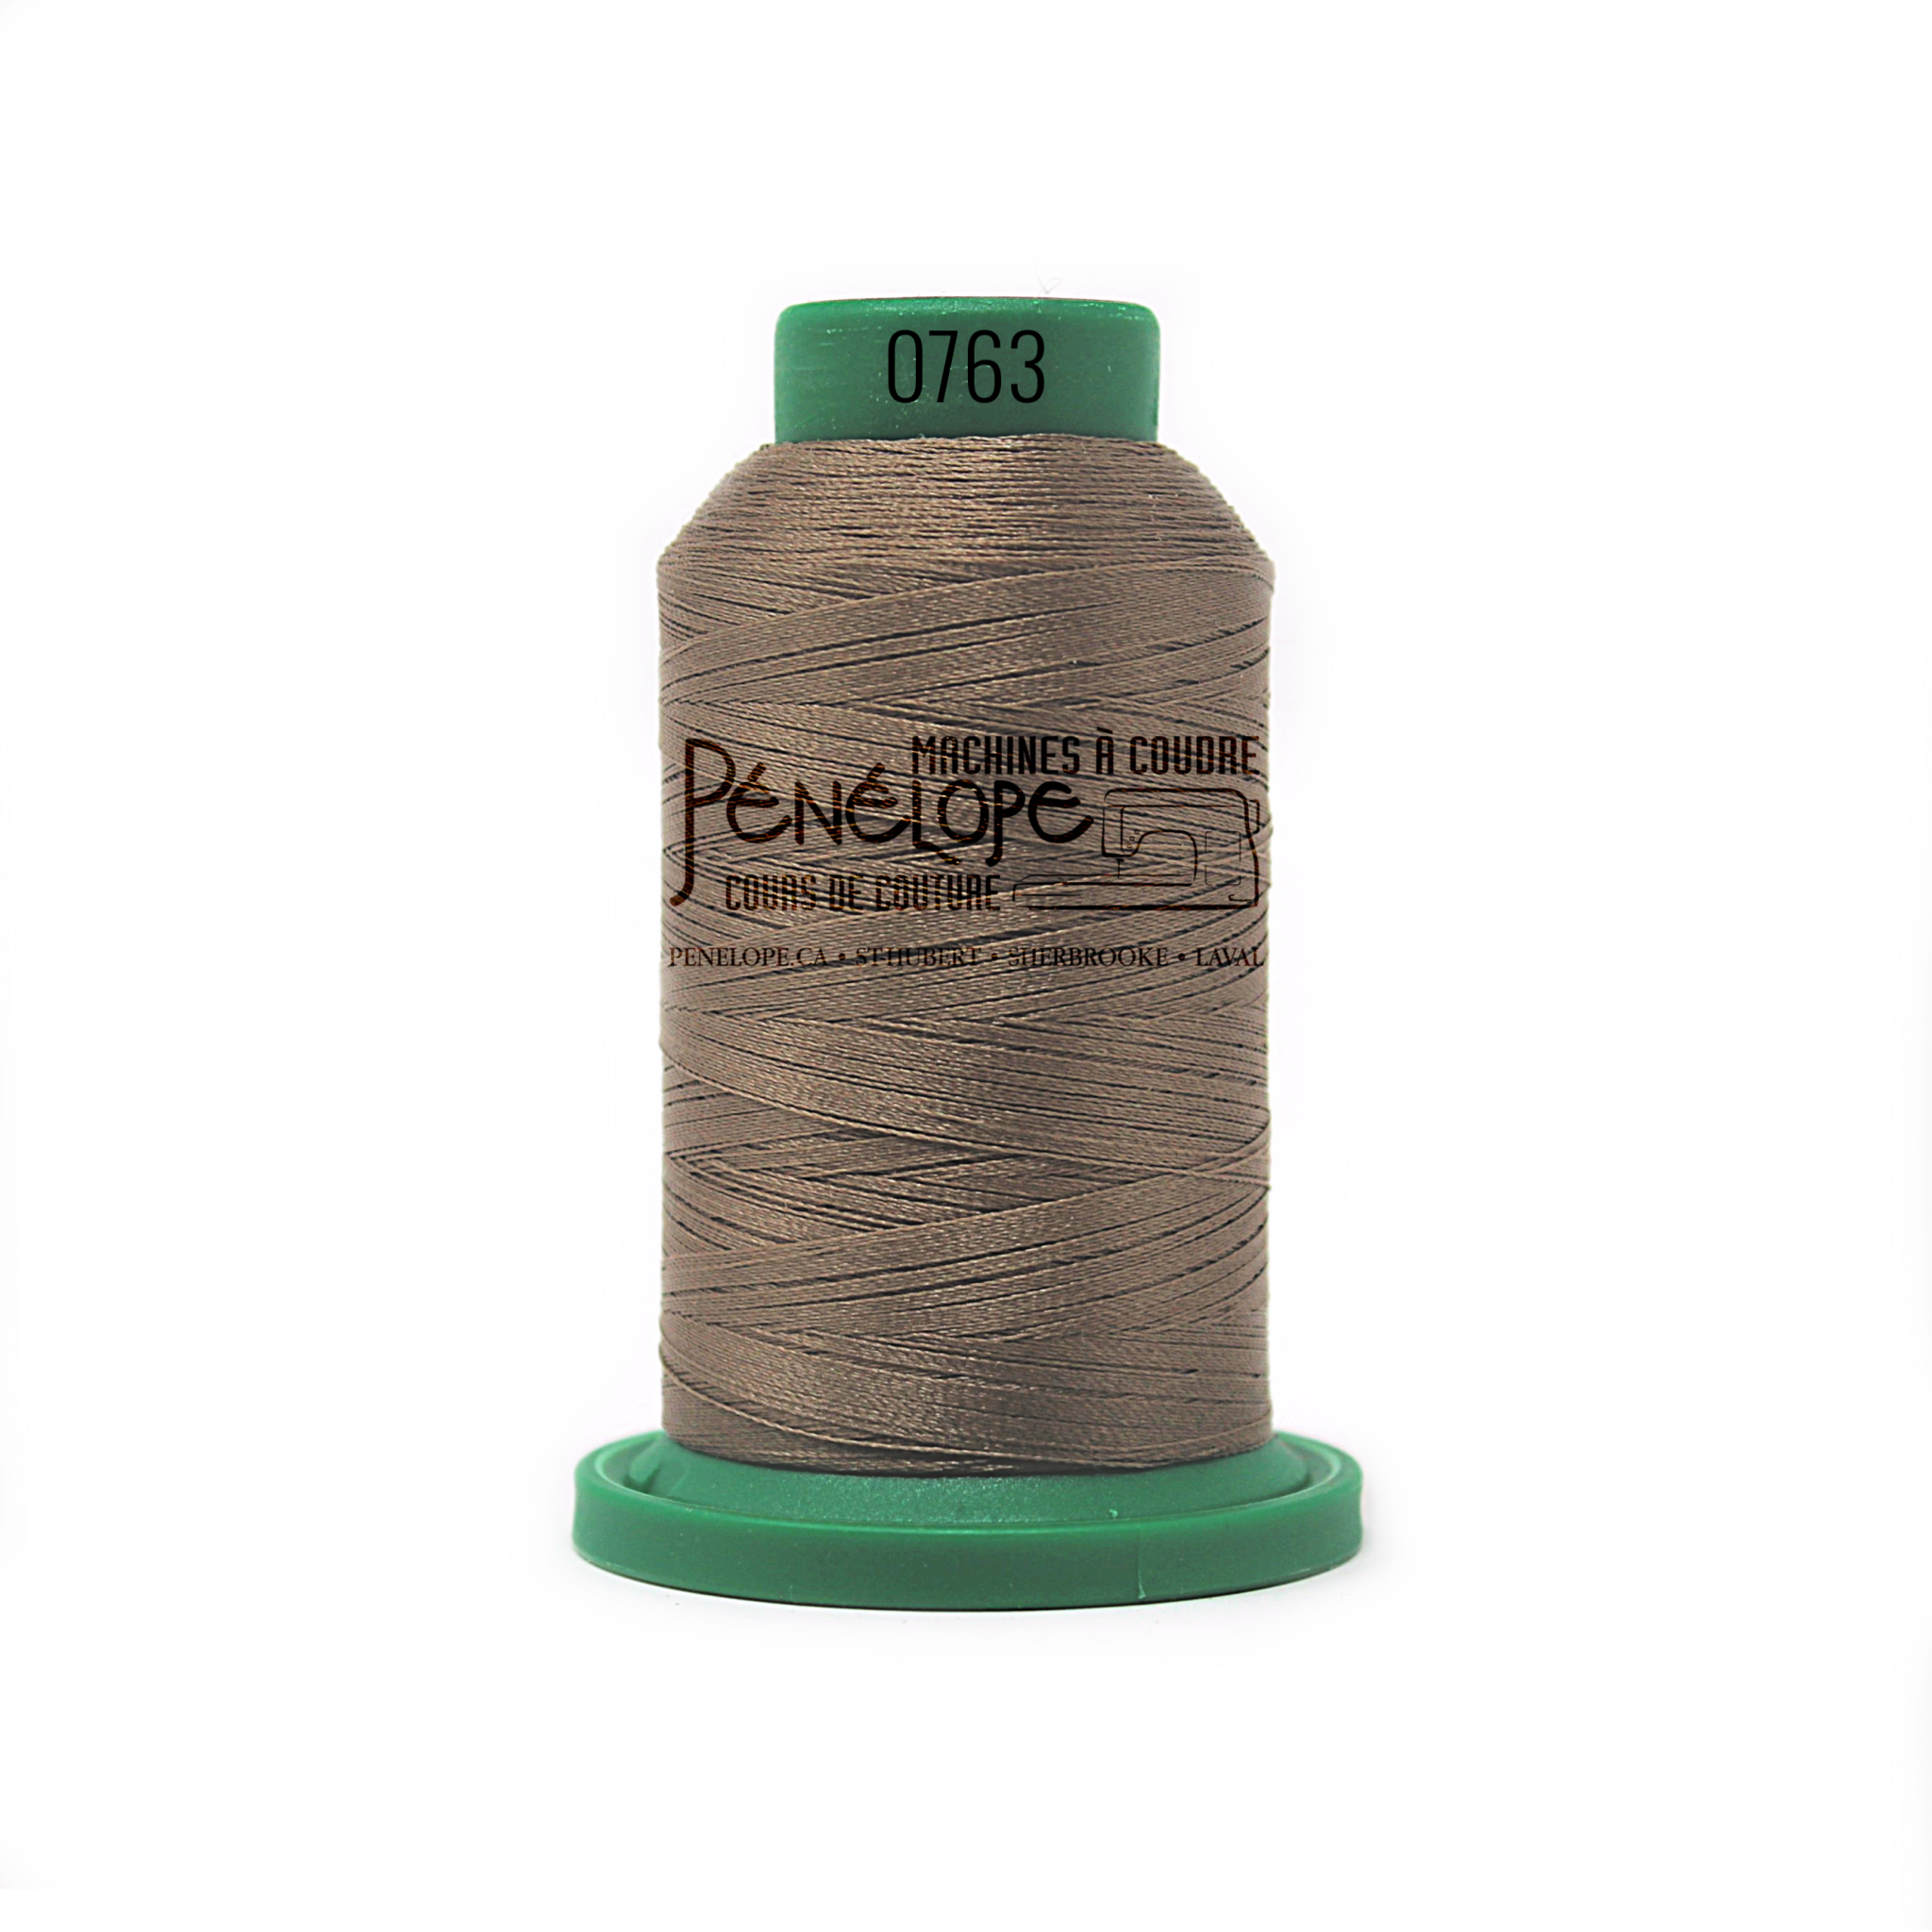 Isacord Isacord sewing and embroidery thread 0763